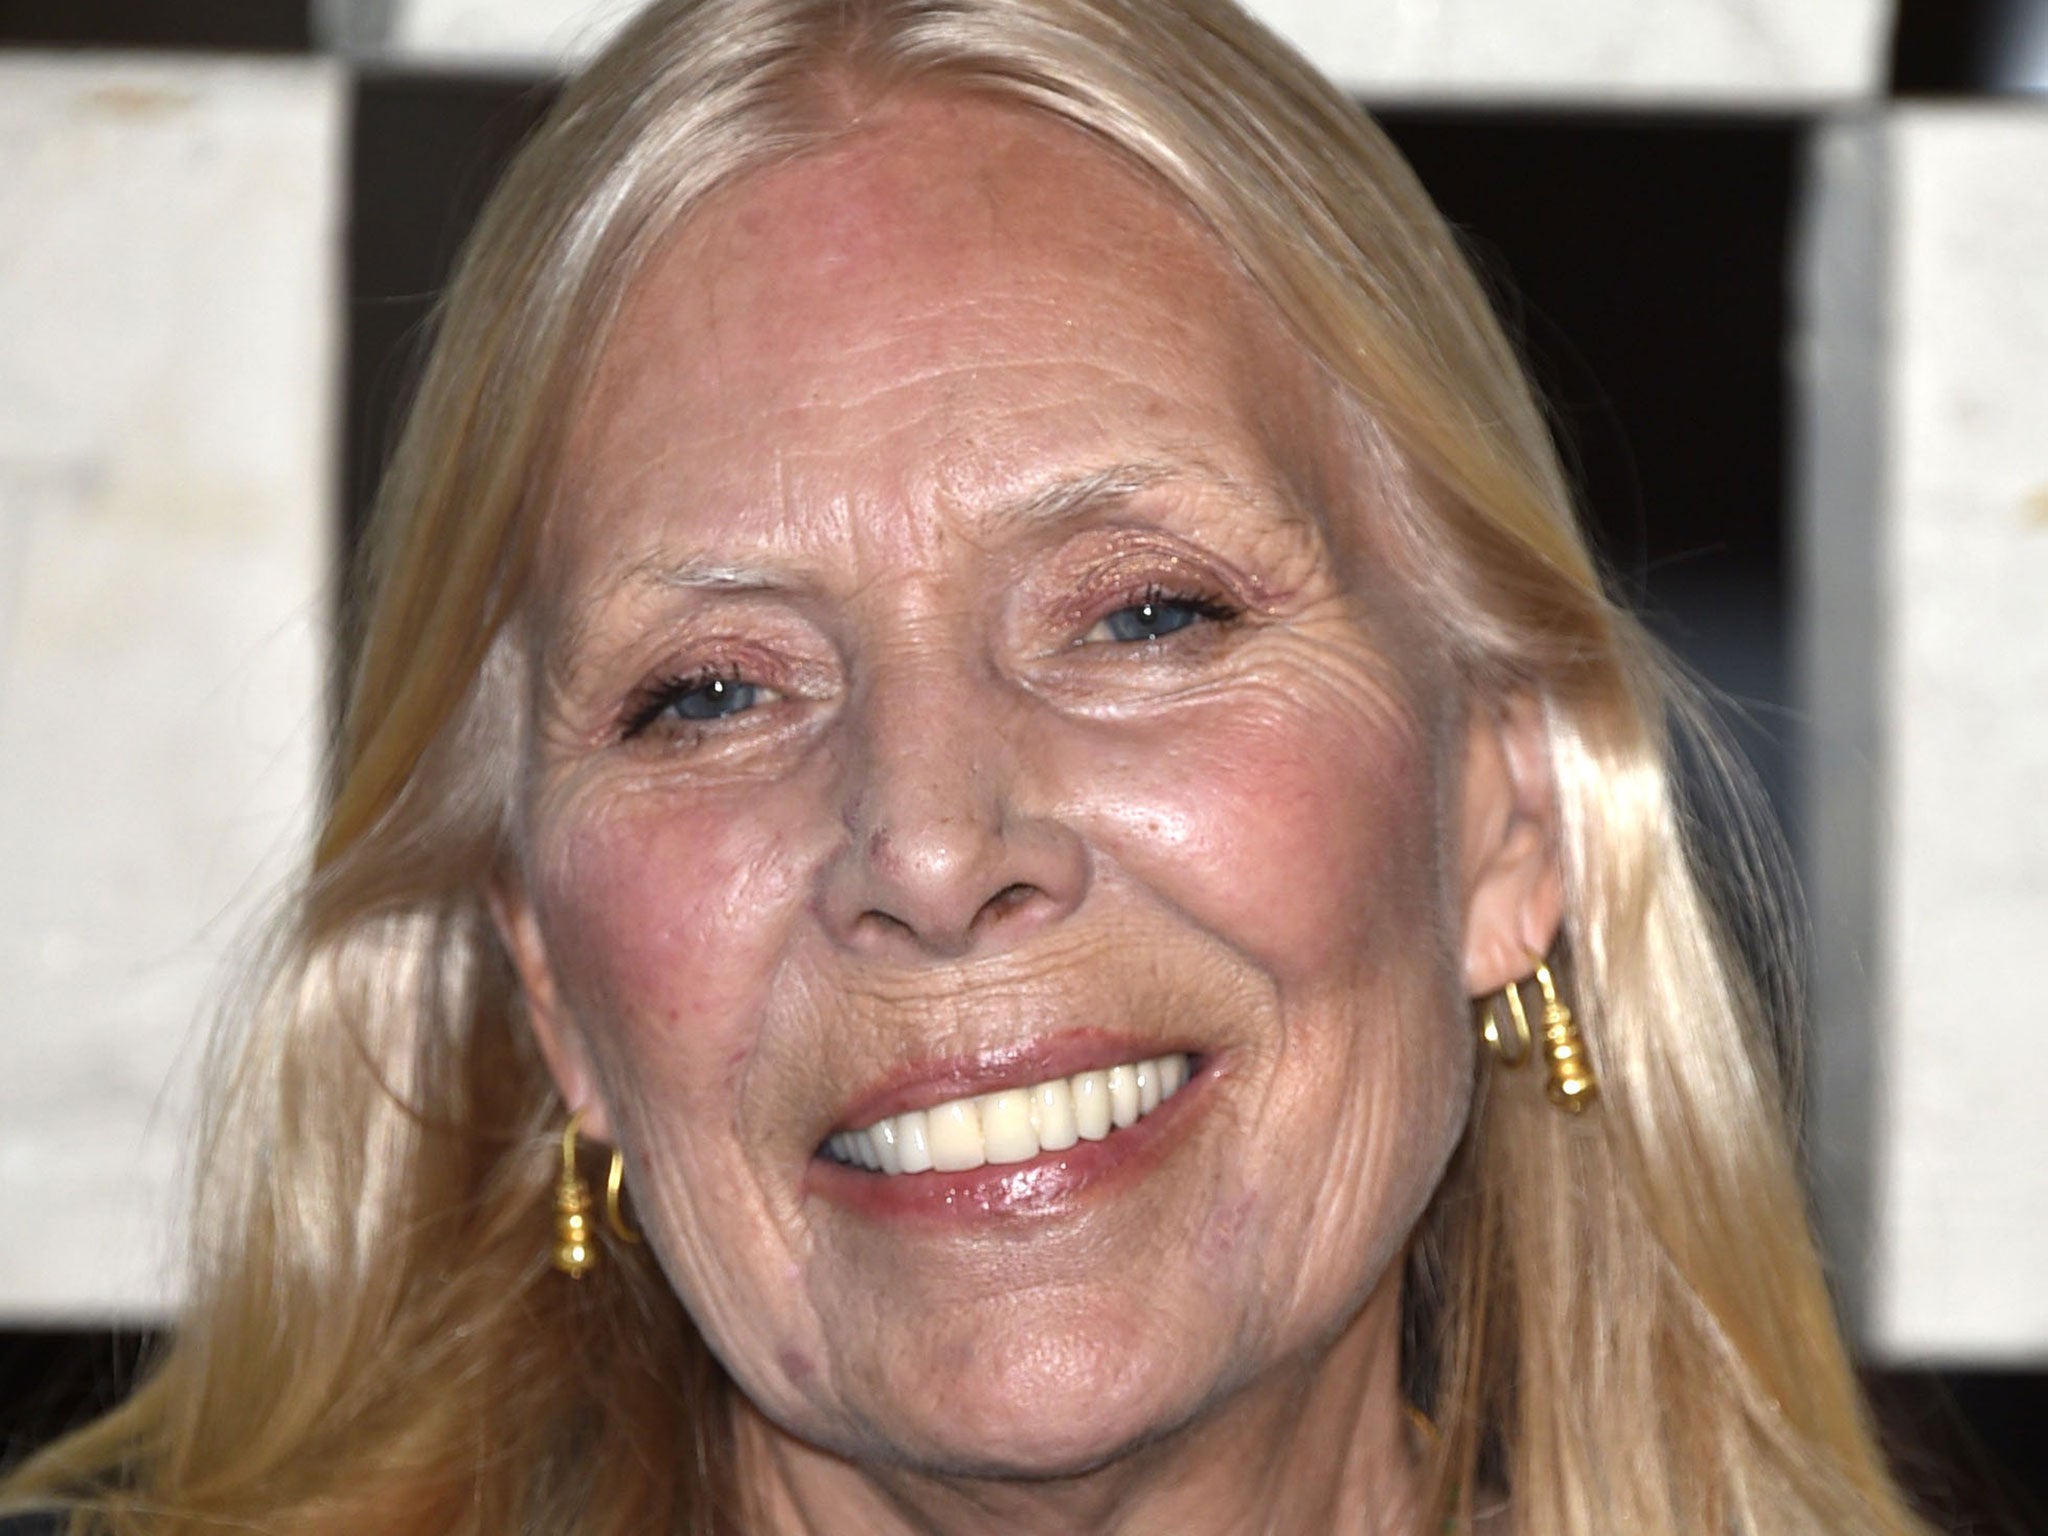 A statement on Joni Mitchell's website said it was awaiting word on her condition